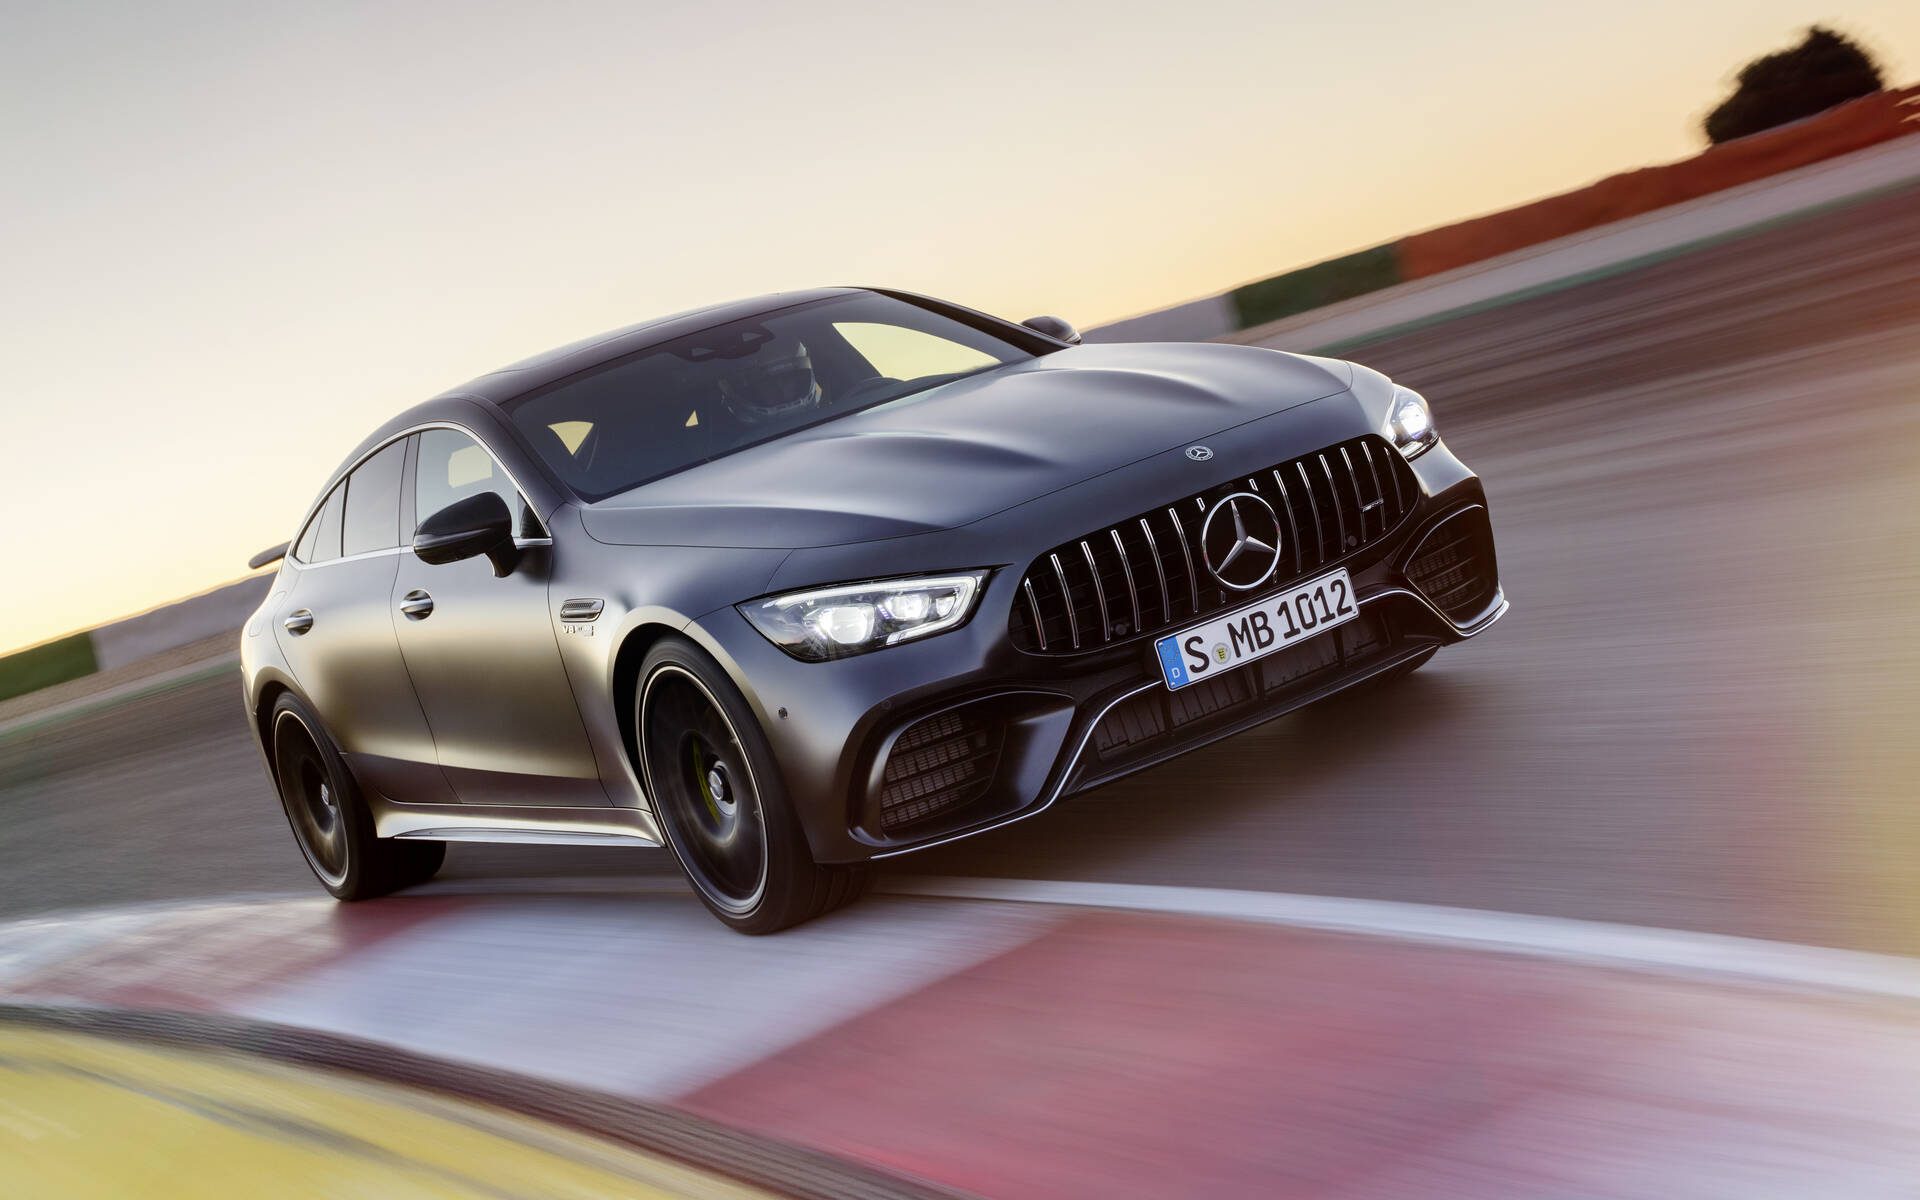 21 Mercedes Benz Amg Gt 4 Door Coupe News Reviews Picture Galleries And Videos The Car Guide